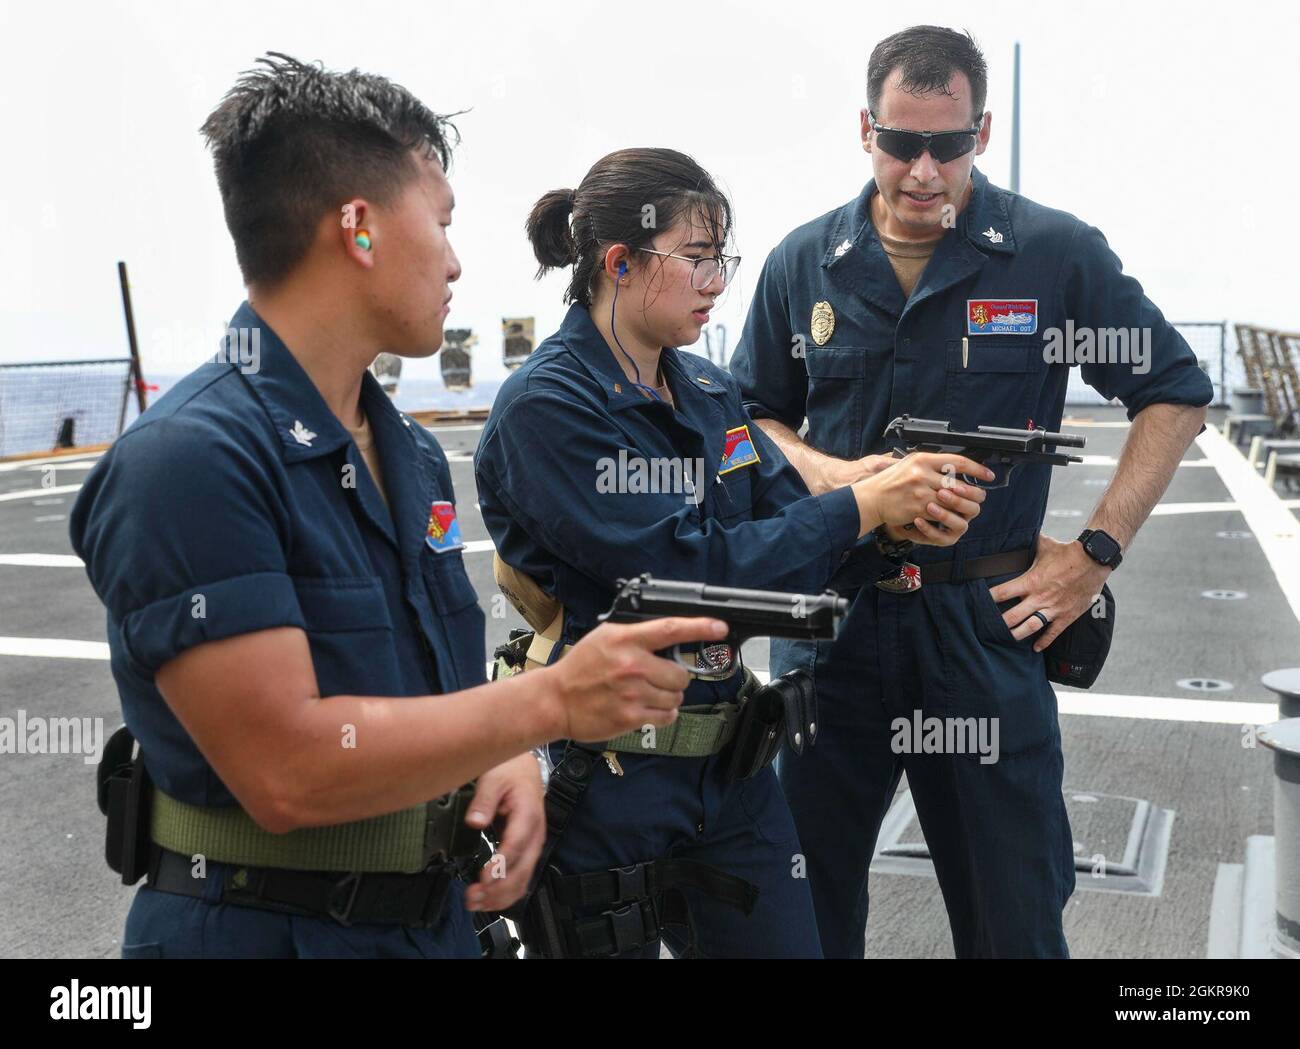 Master at Arms 1st Class Michael Oot, from Syracuse, N.Y., gives weapon familiarization training to Fire Controlman (Aegis) 3rd Class Nhia Her, from Saint Paul, Minn, and Ens. Nicole Schiff, from Silver Springs, Md., during a small arms qualification aboard Arleigh Burke-class guided-missile destroyer USS Benfold (DDG 65). Benfold is assigned to Commander, Task Force (CTF) 71/Destroyer Squadron (DESRON) 15, the Navy’s largest forward-deployed DESRON and the U.S. 7th Fleet’s principal surface force. Stock Photo